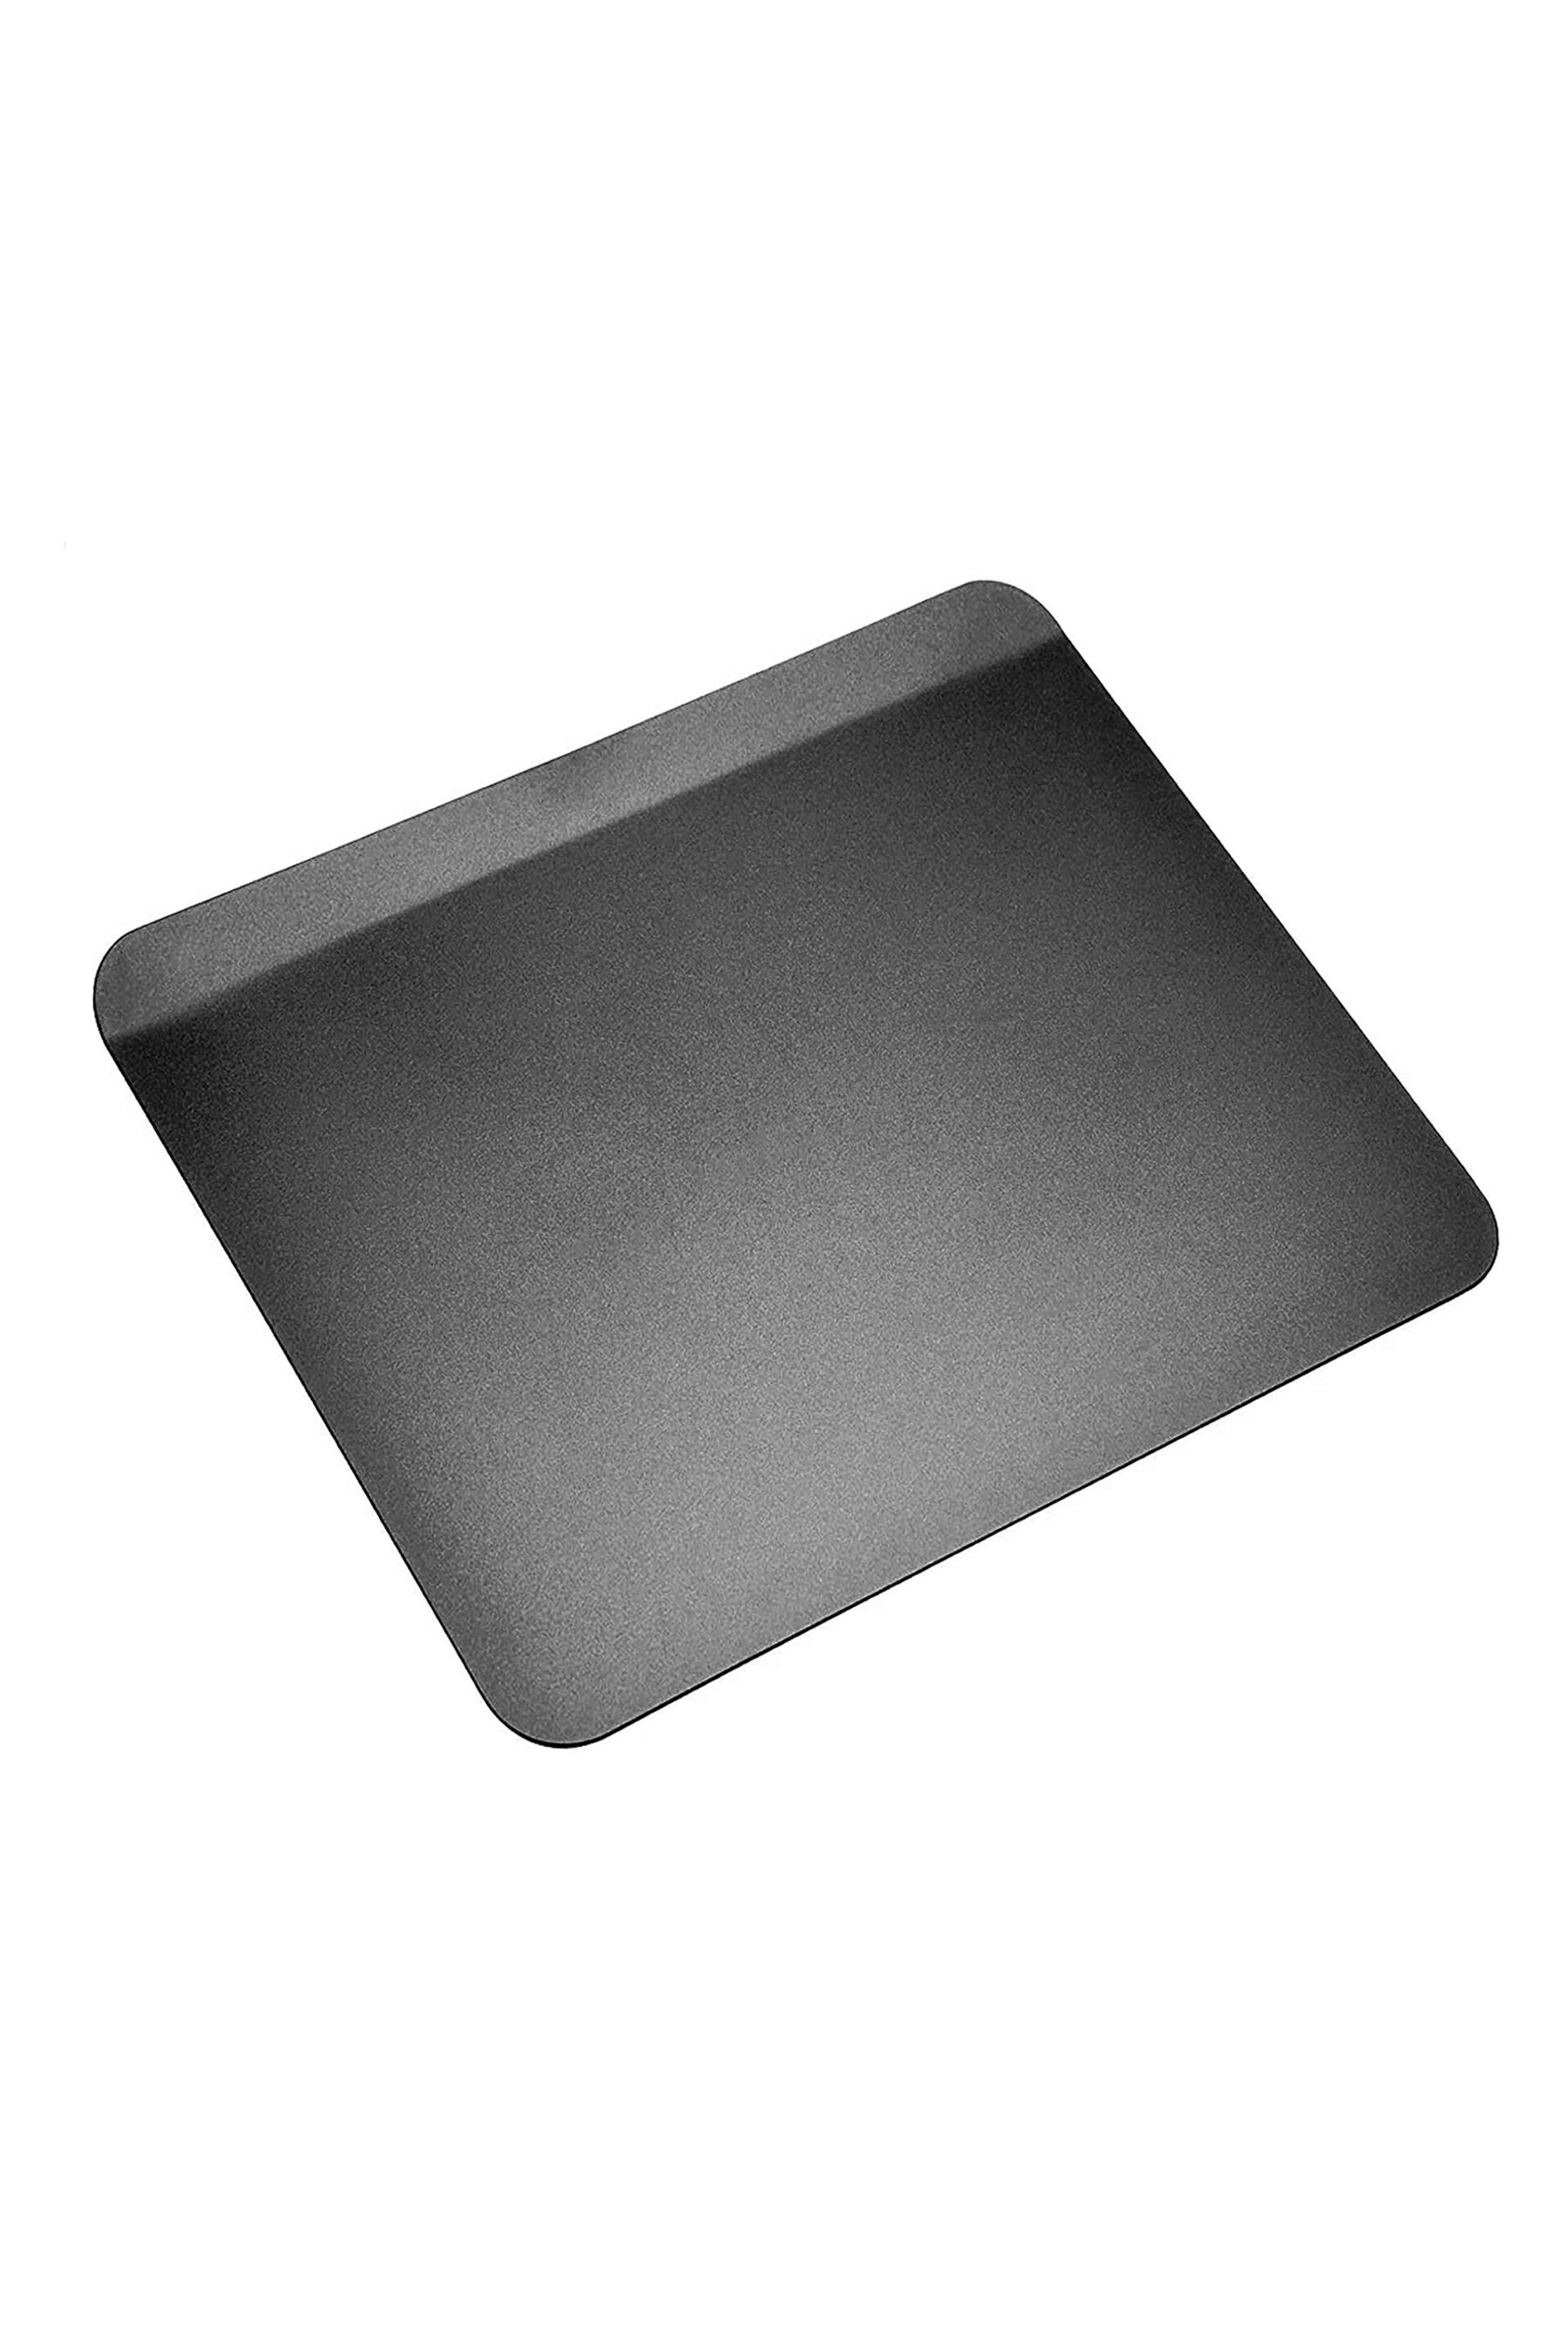 Luxe Grey 34cm Insulated Baking Sheet - Image 1 of 1